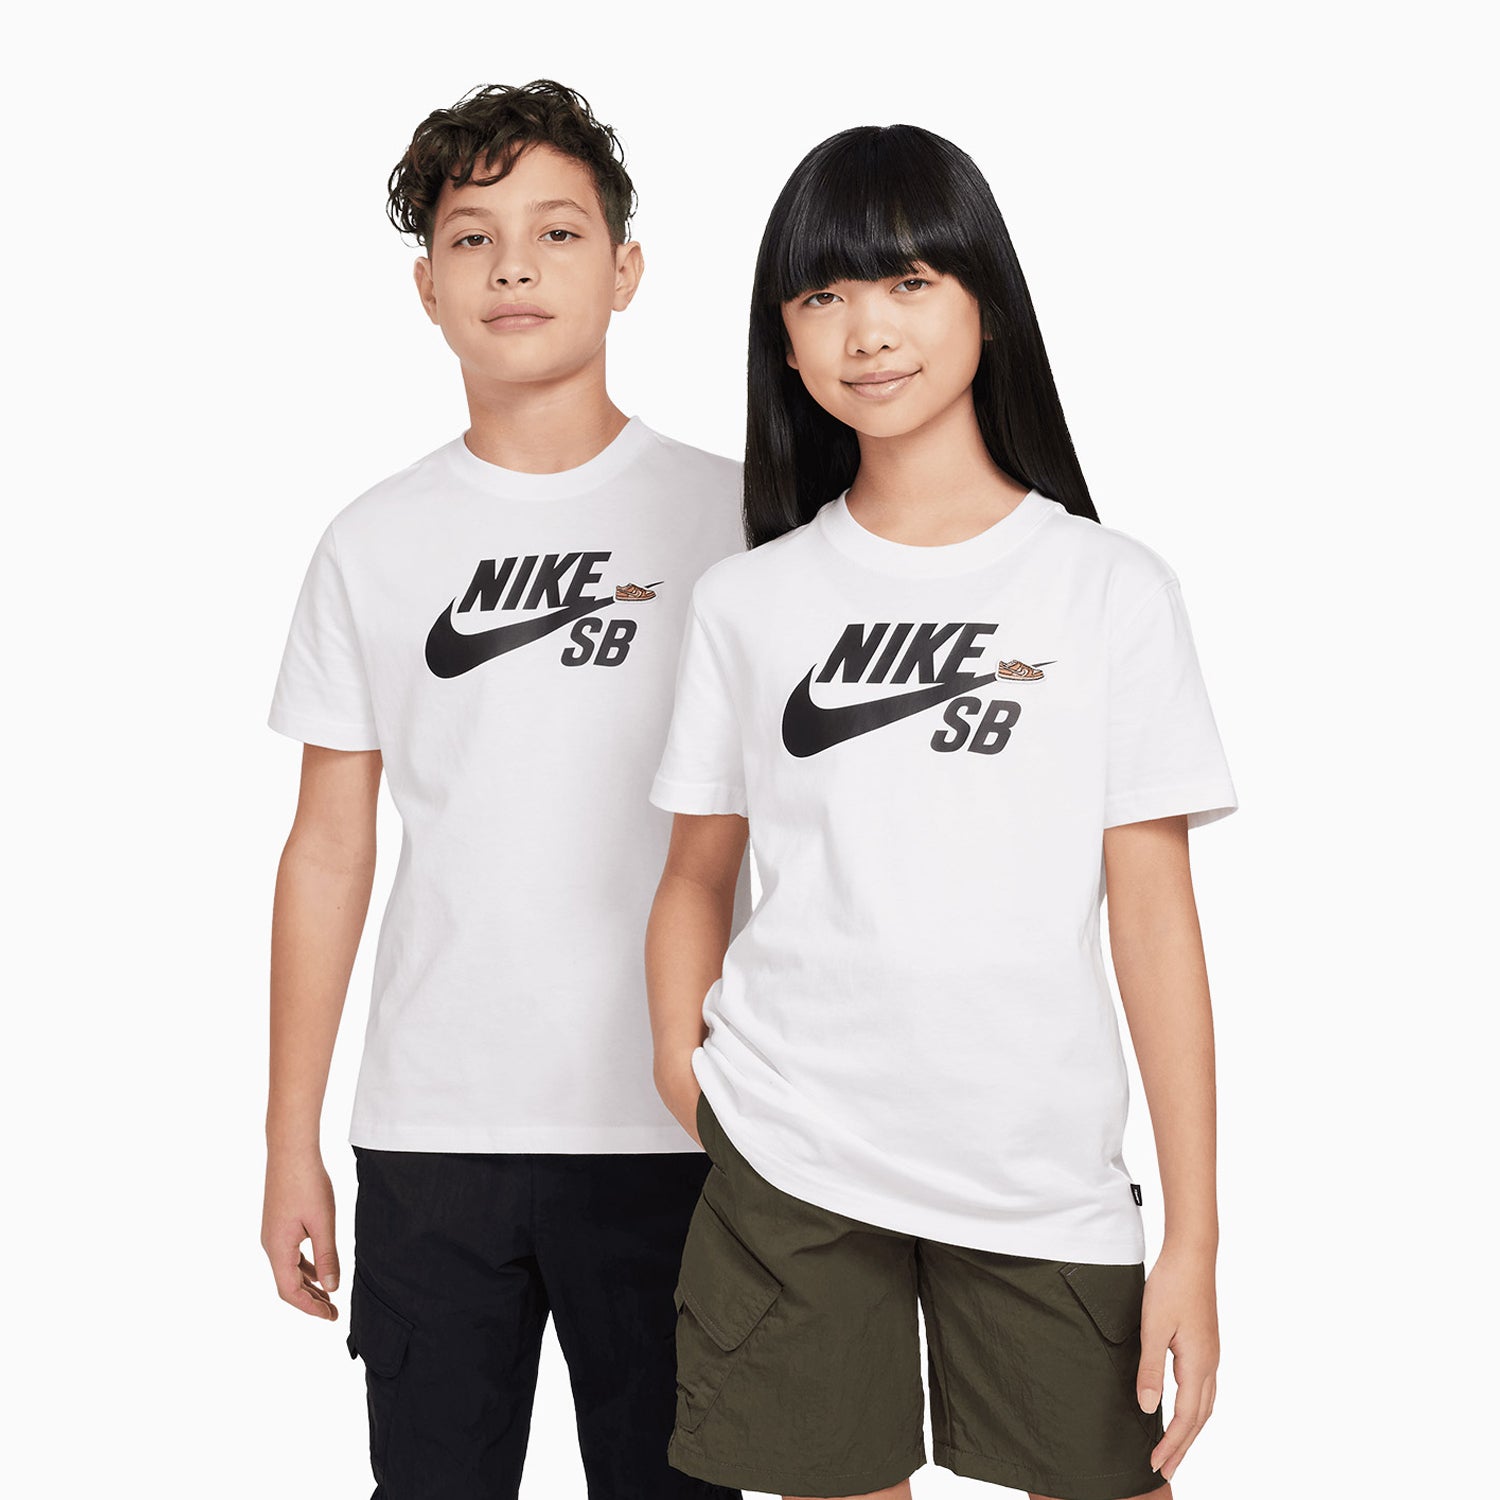 nike-kids-sportswear-t-shirt-and-shorts-outfit-fn9673-100/FD3289-010